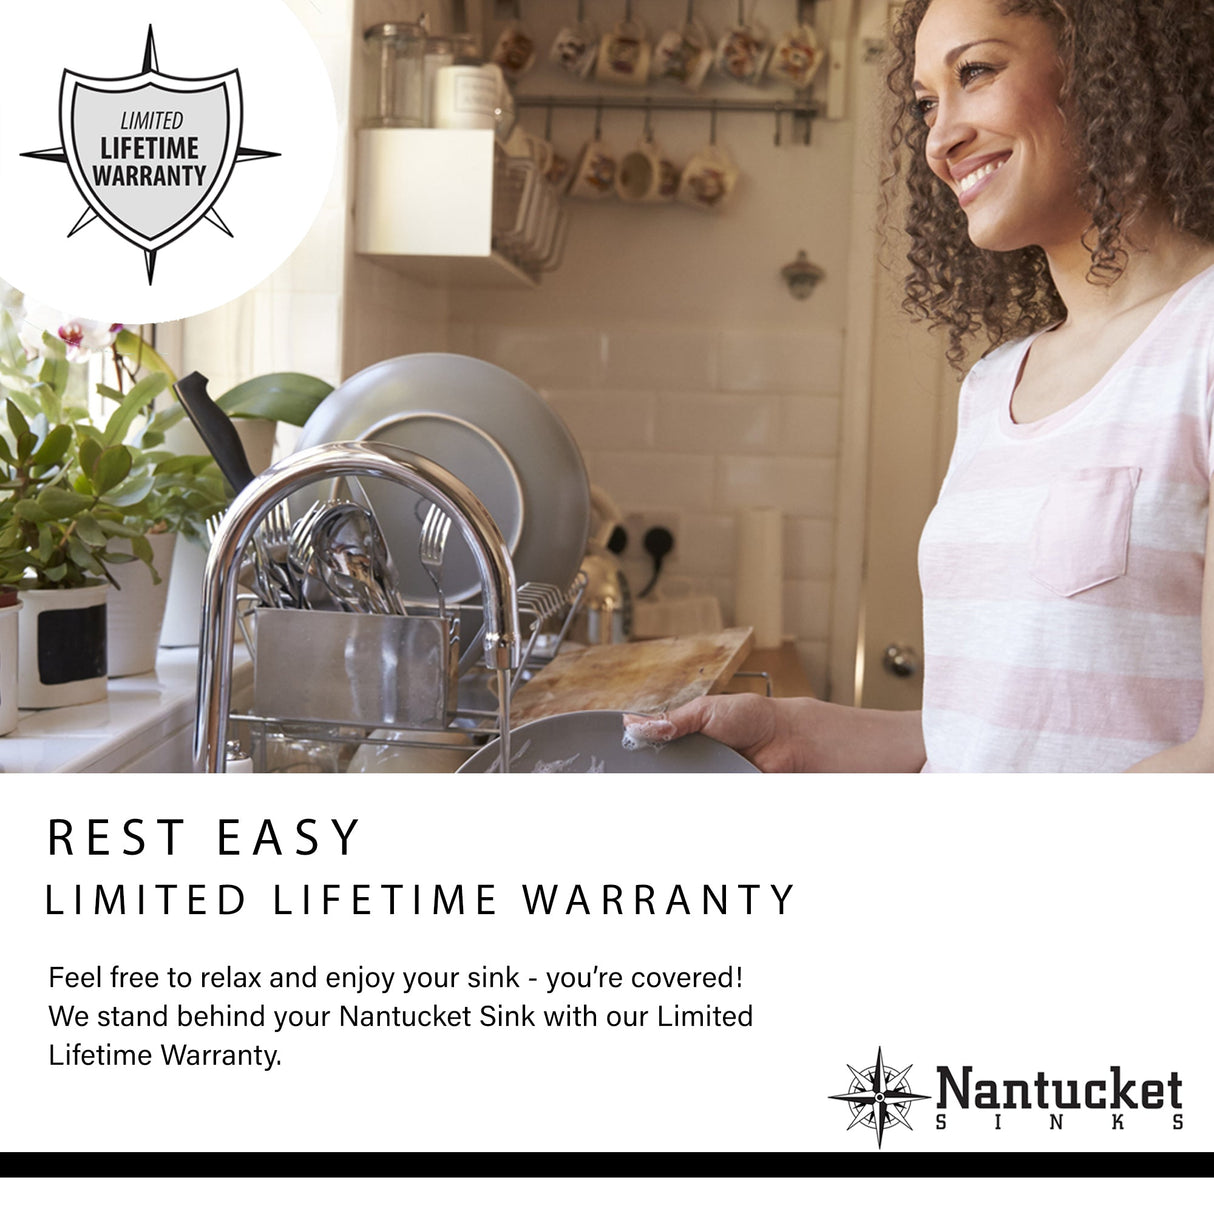 Nantucket Sinks' SR-PS2-2818-16 - 28 Inch Pro Series Prep-Station Single Bowl Undermount Stainless Steel Kitchen Sink with Included Accessories